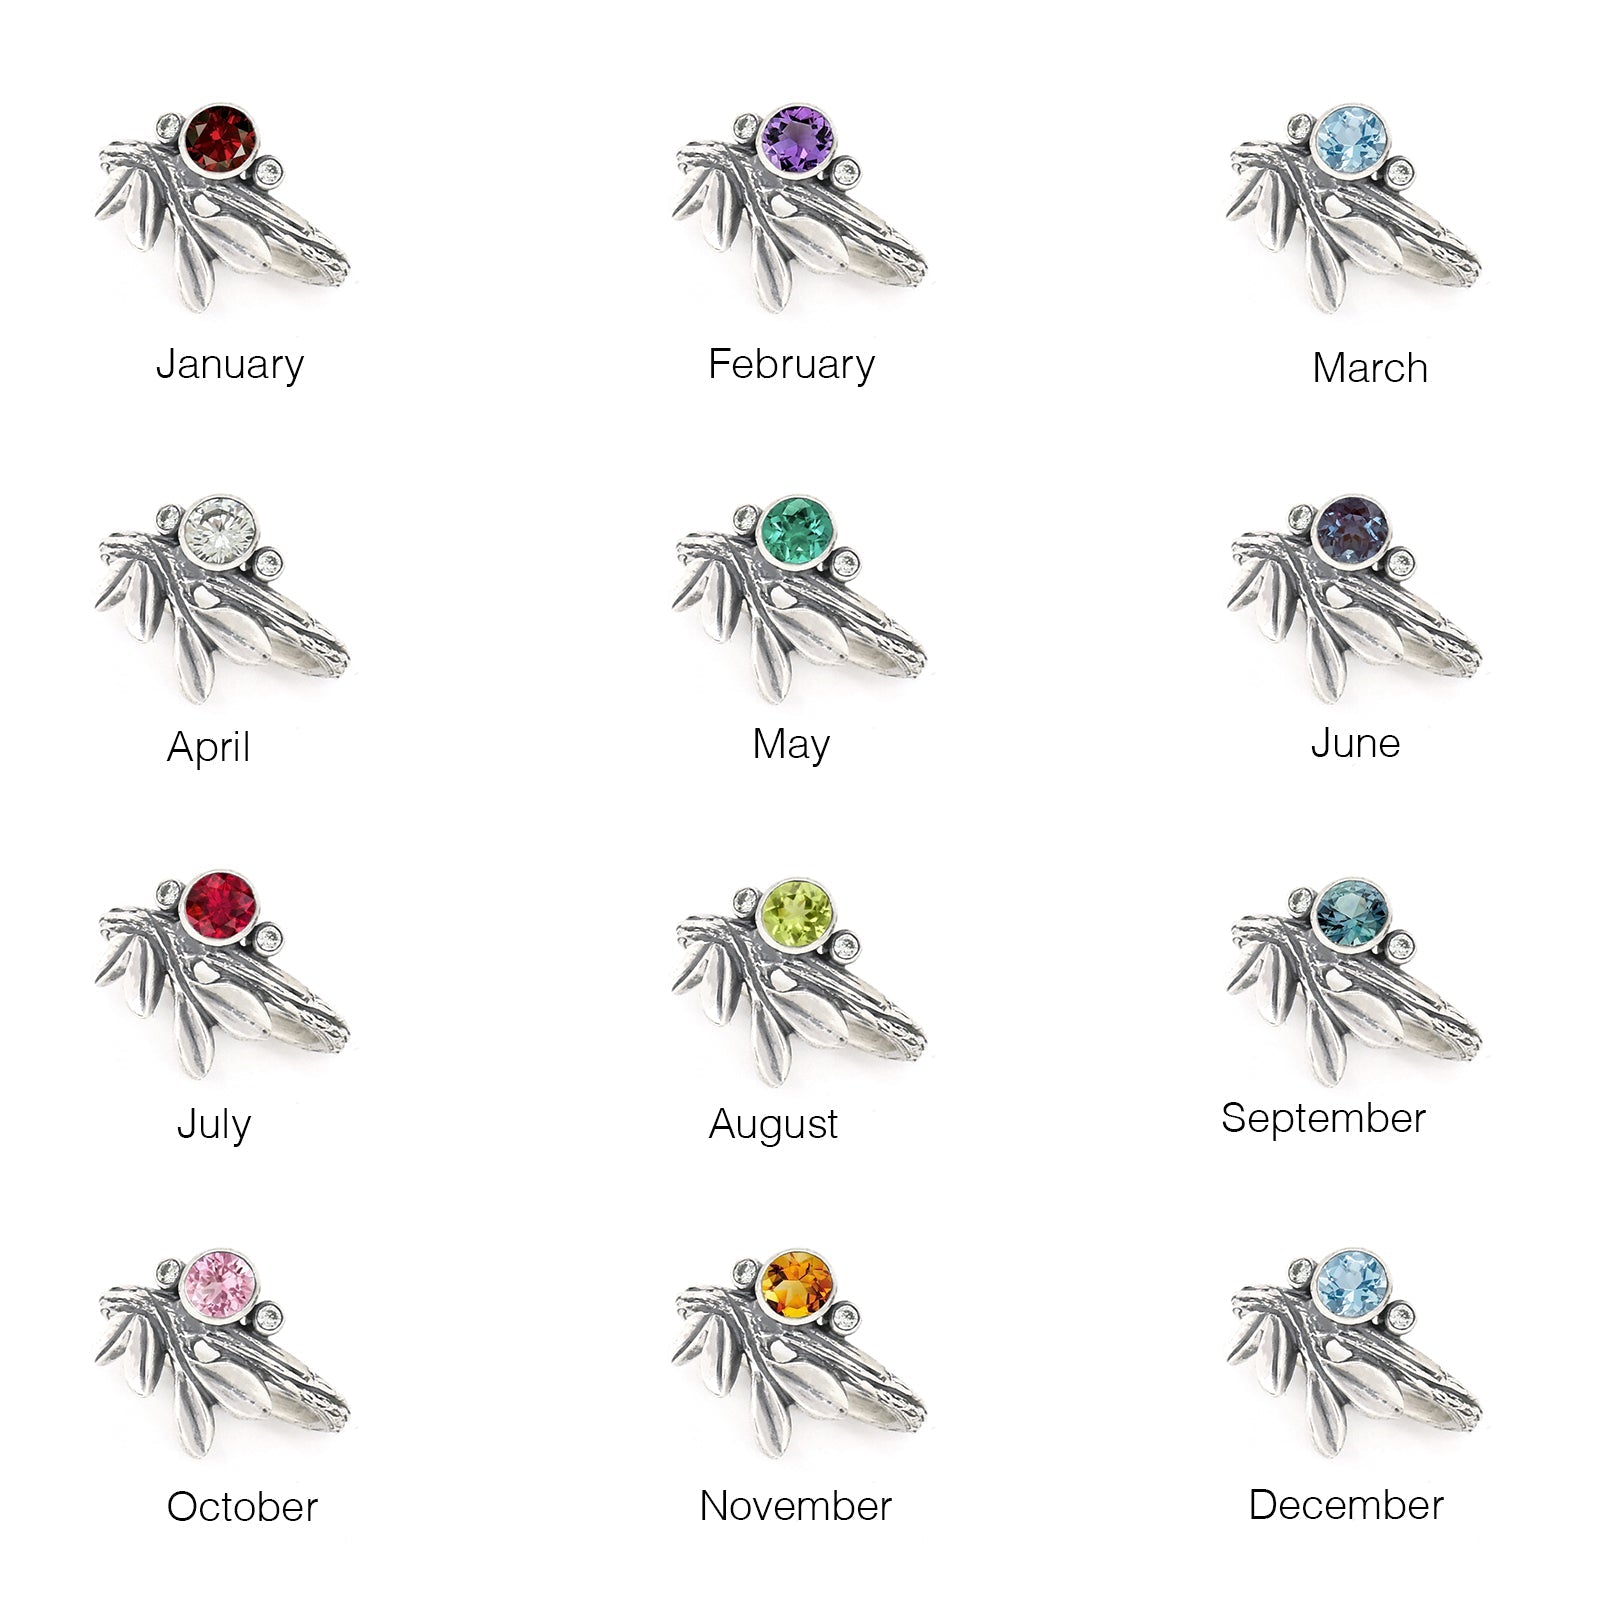 Silver Growing Love Birthstone Ring - your choice of 5mm stone - Ring May - Lab Created Emerald January - Idaho Garnet 6752 - handmade by Beth Millner Jewelry